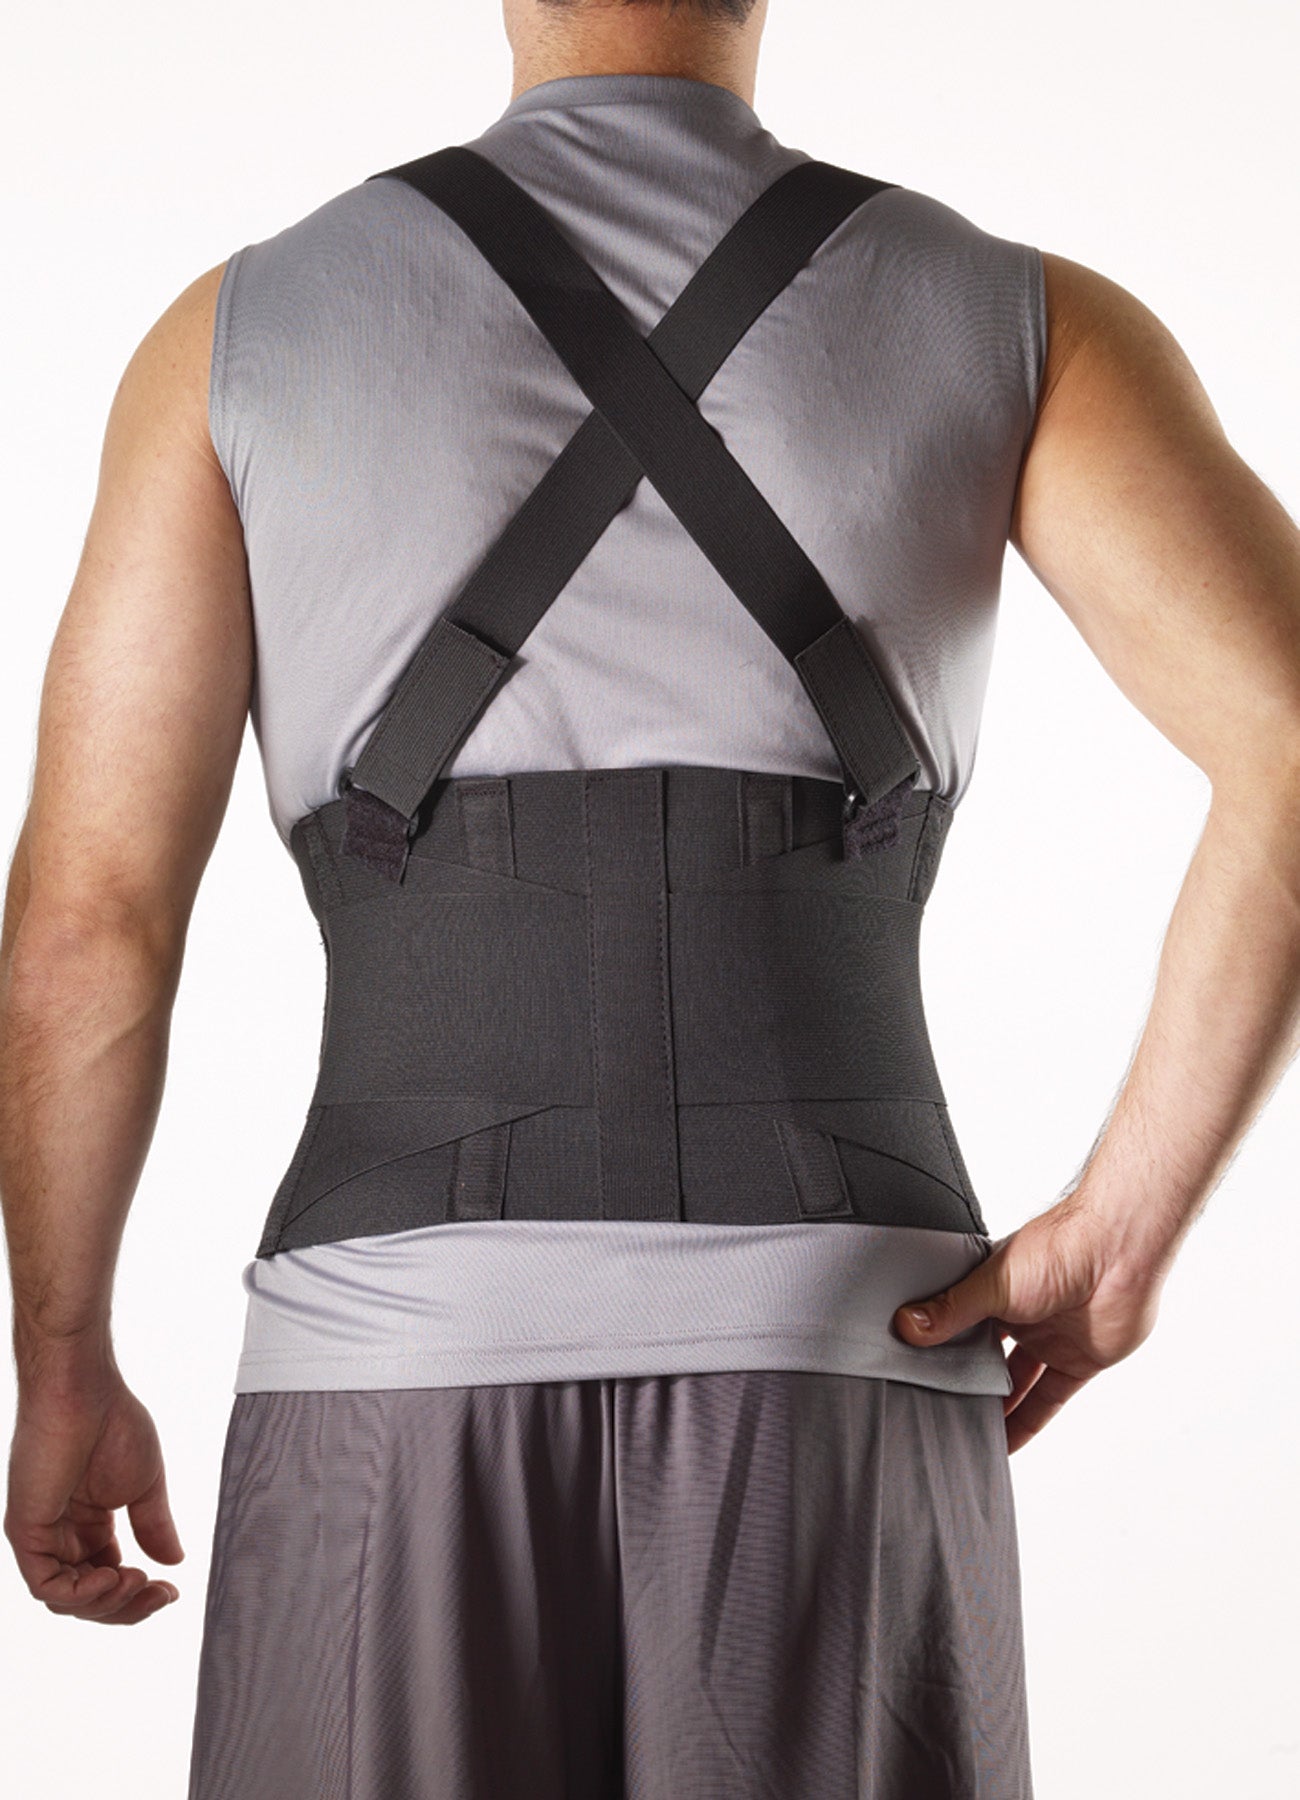 Corflex Industrial Back Support Online Canada | Brace Aid Medical